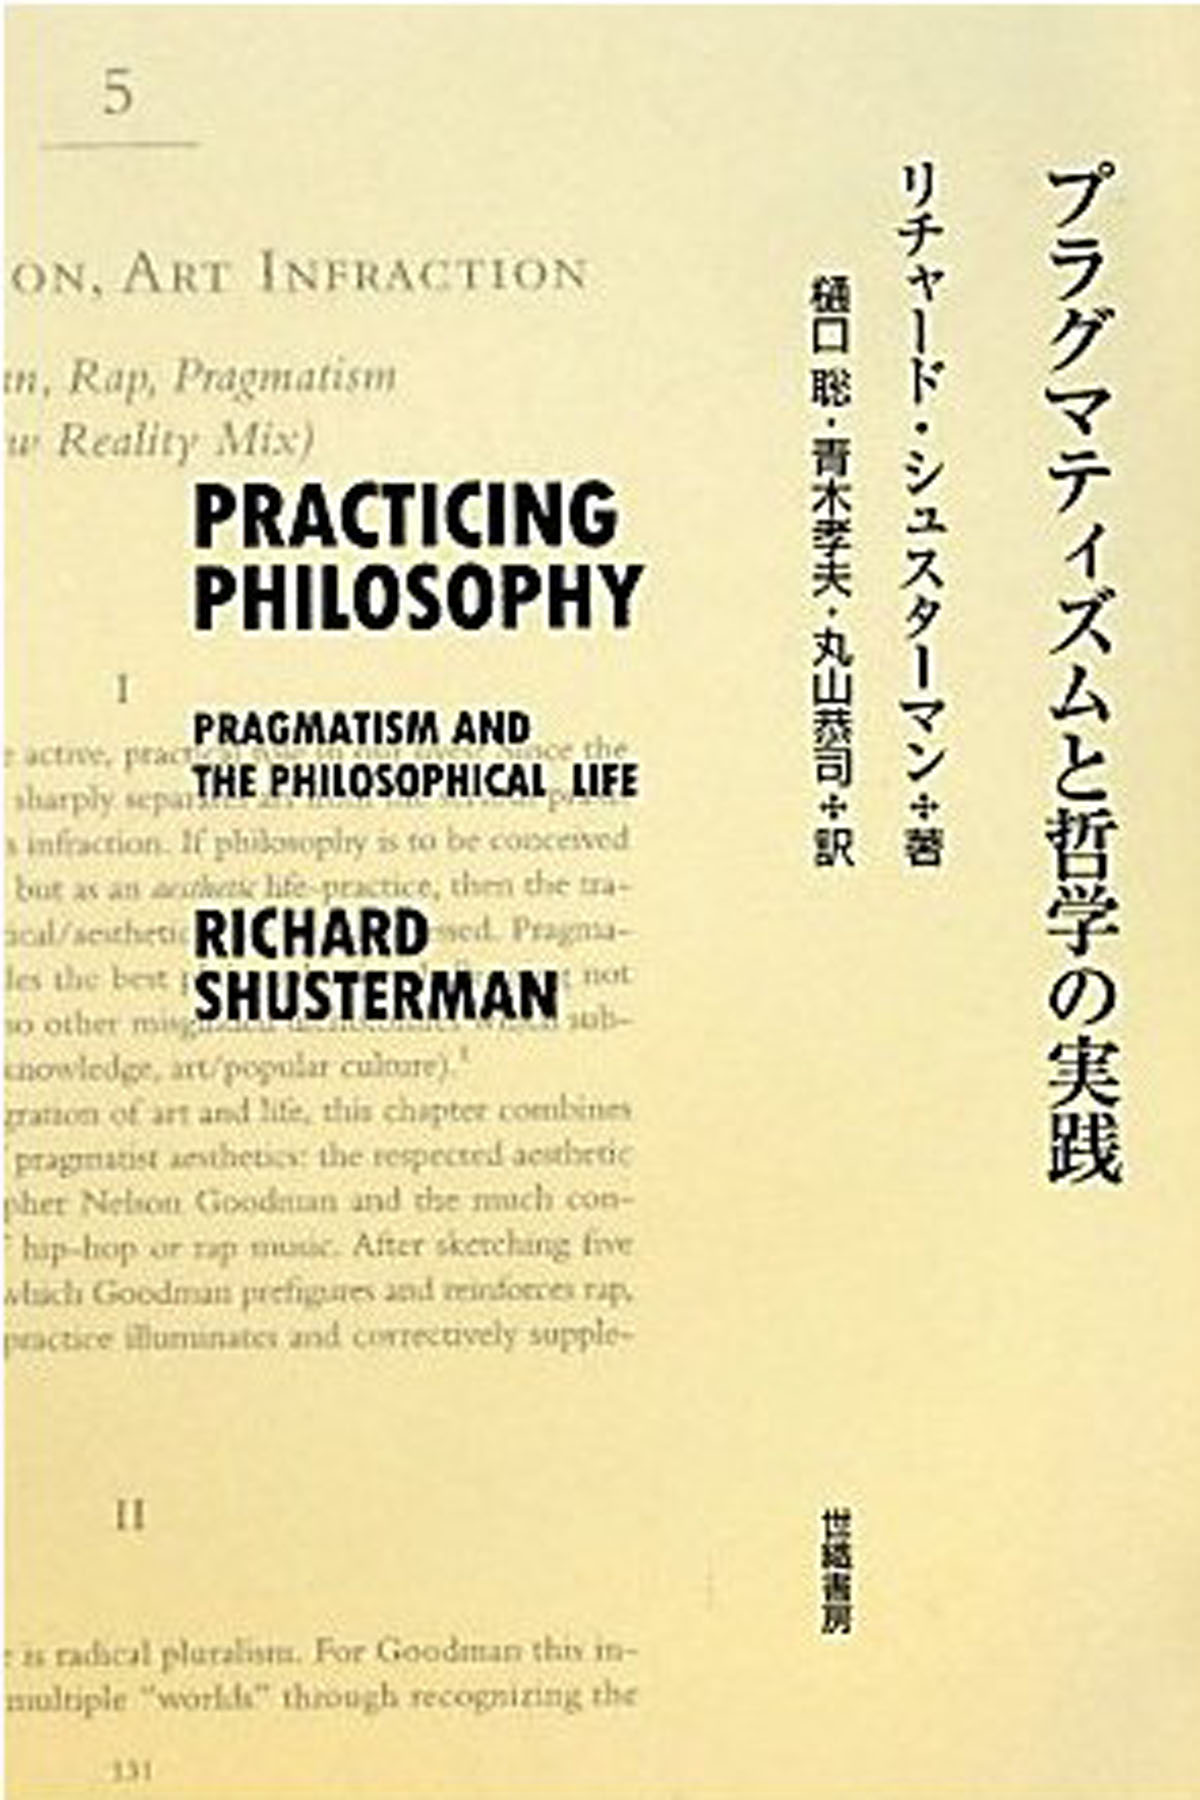 Japanese version of Practicing Philosophy book cover